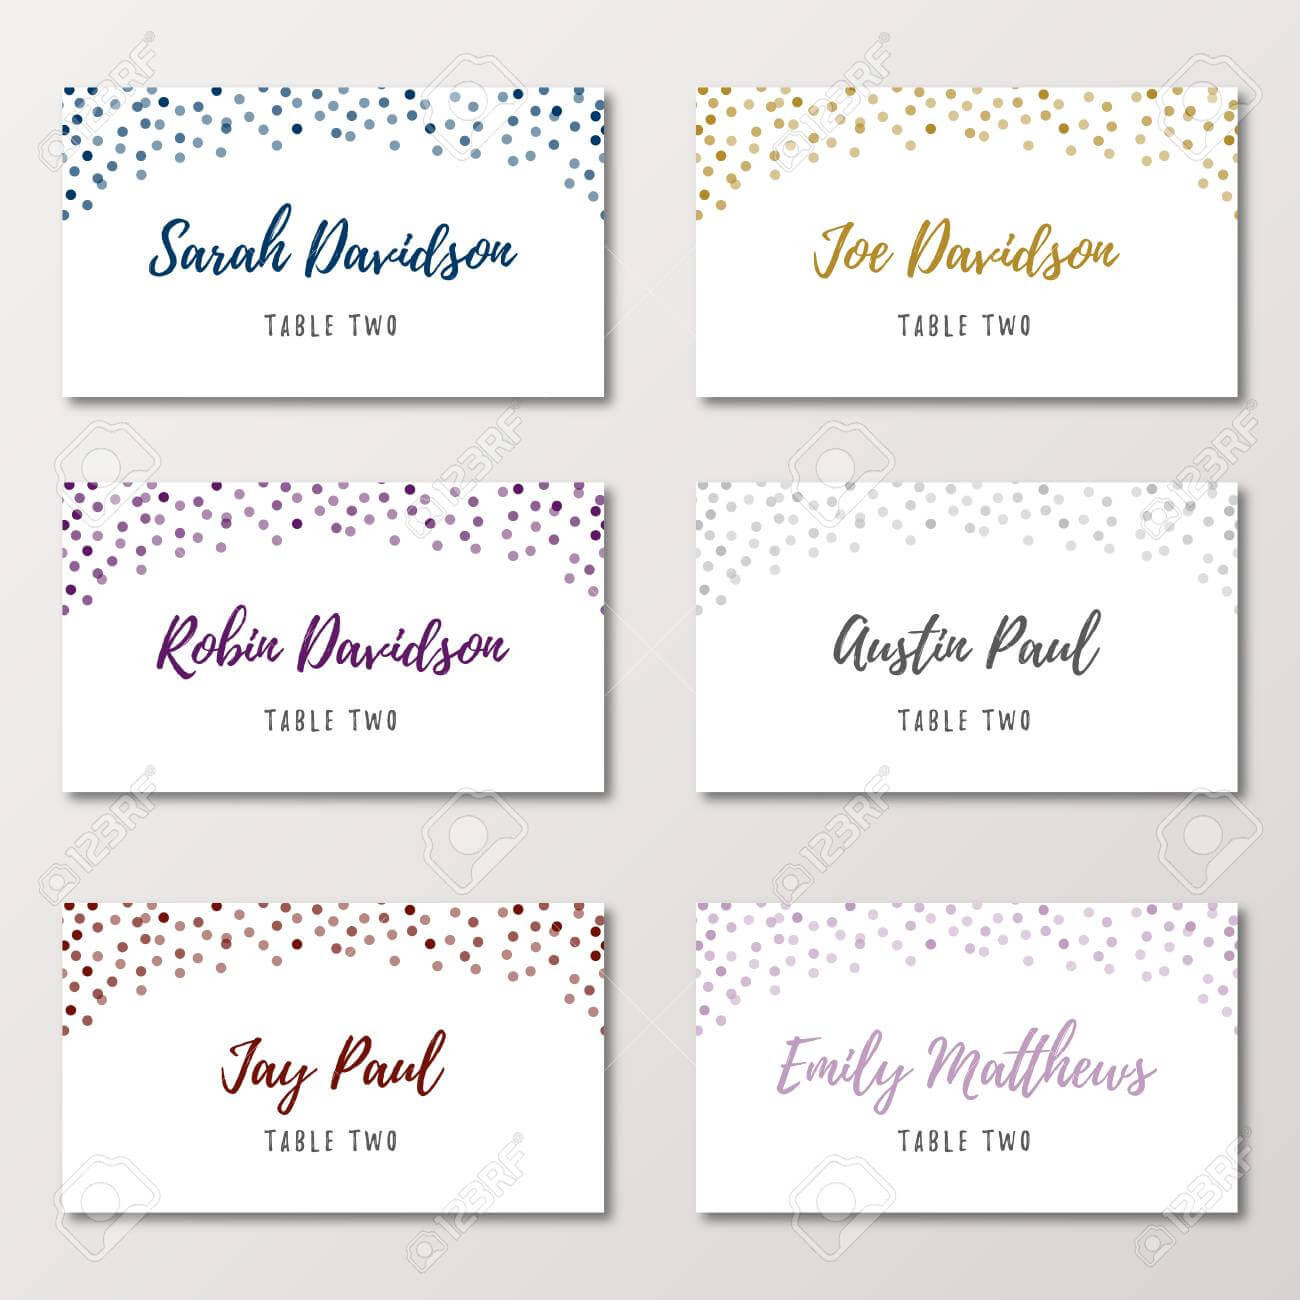 Table Cards Template Calep midnightpig co In Table Name Card Template 